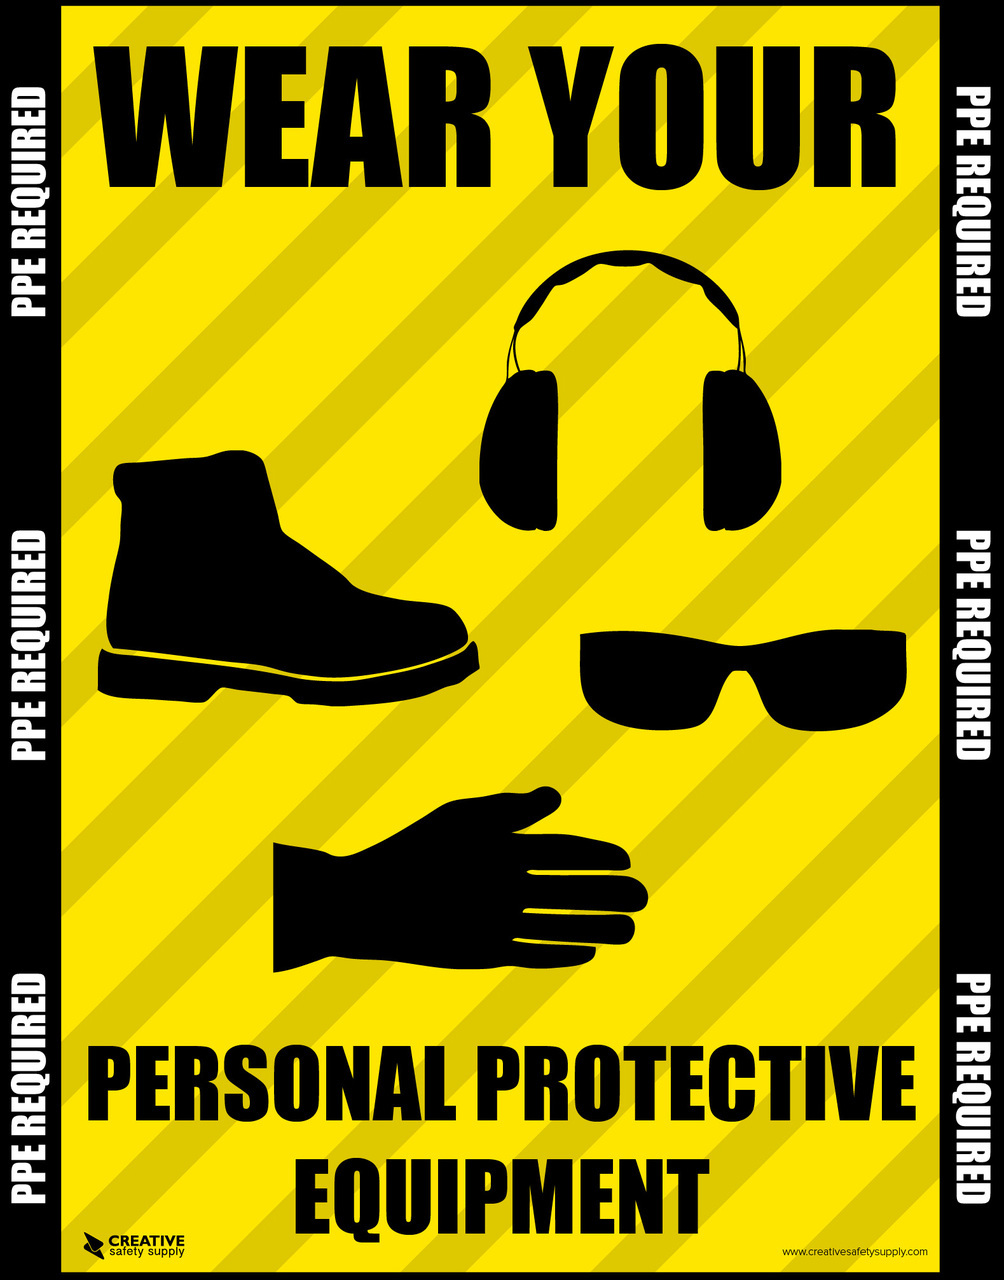 Wear Your Personal Protective Equipment